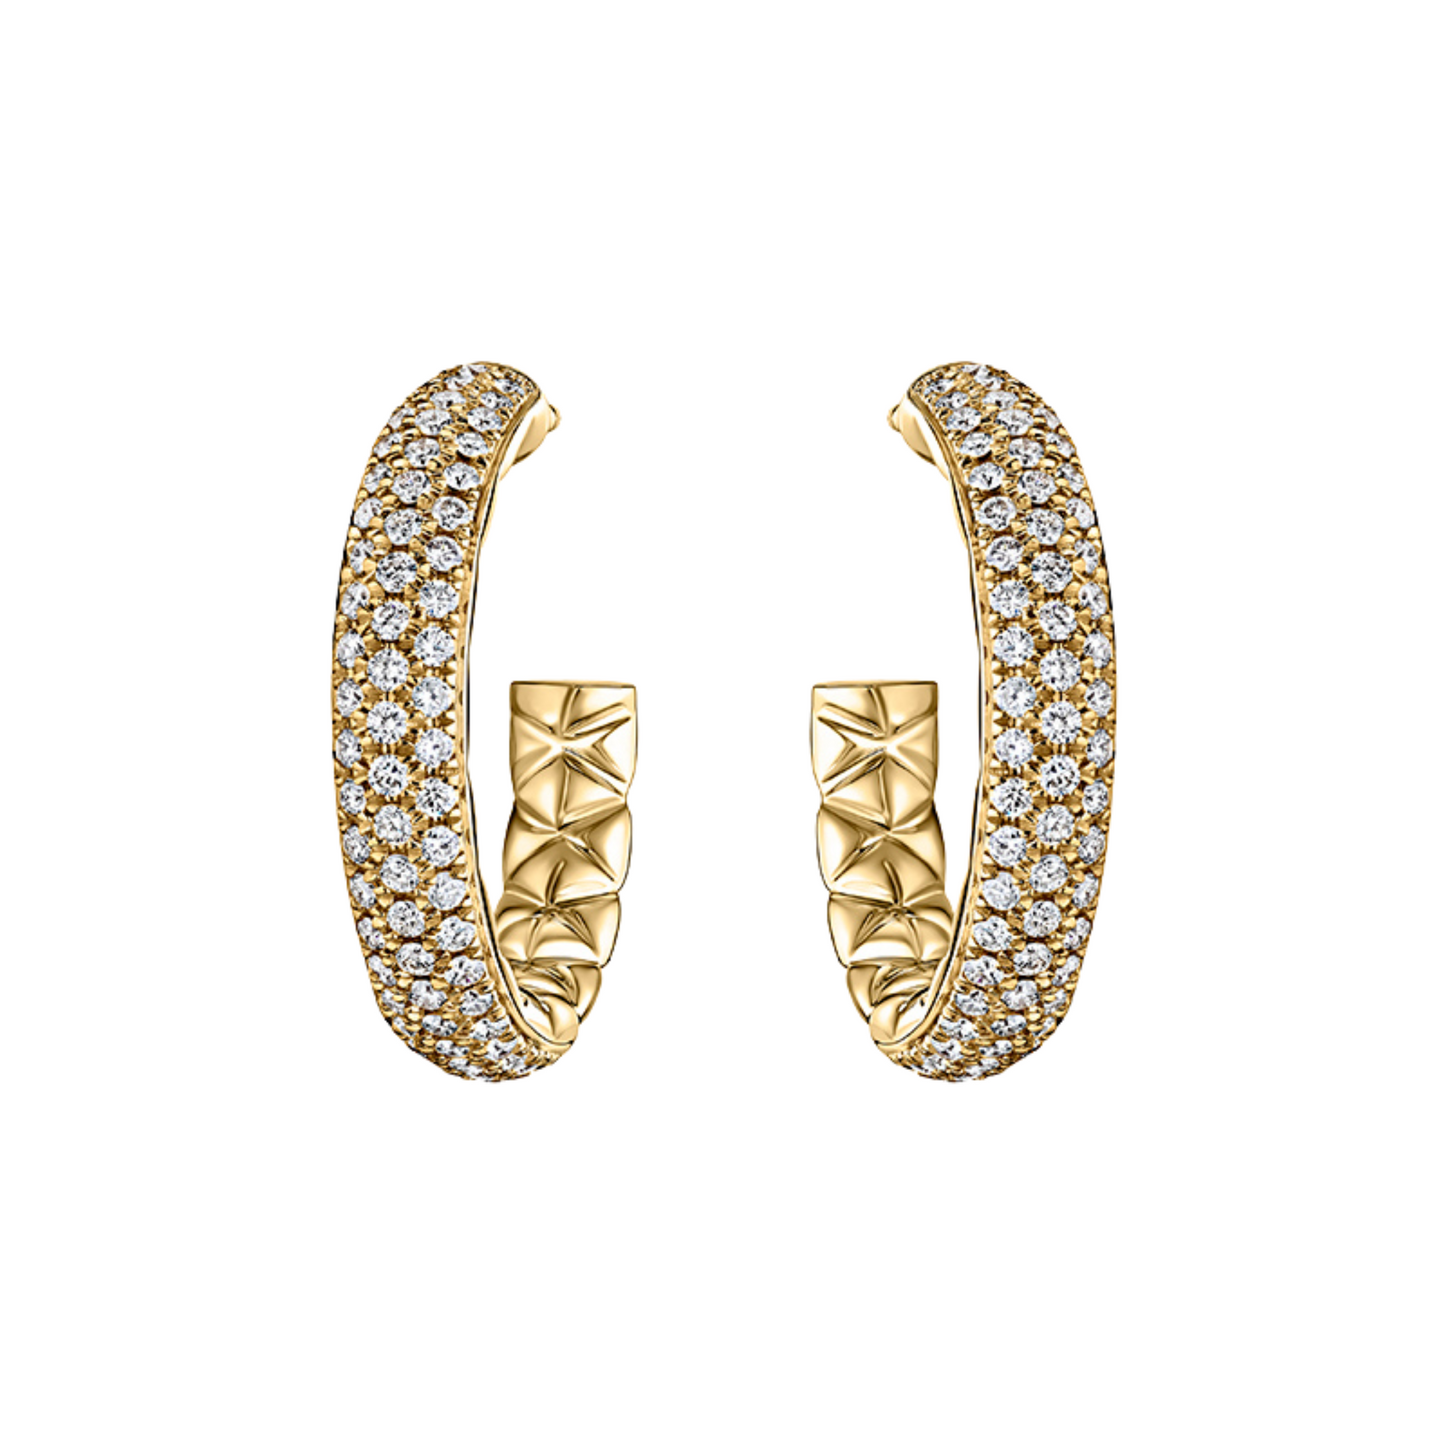 A. Jaffe Pave Diamond Quilted Hoop Earrings